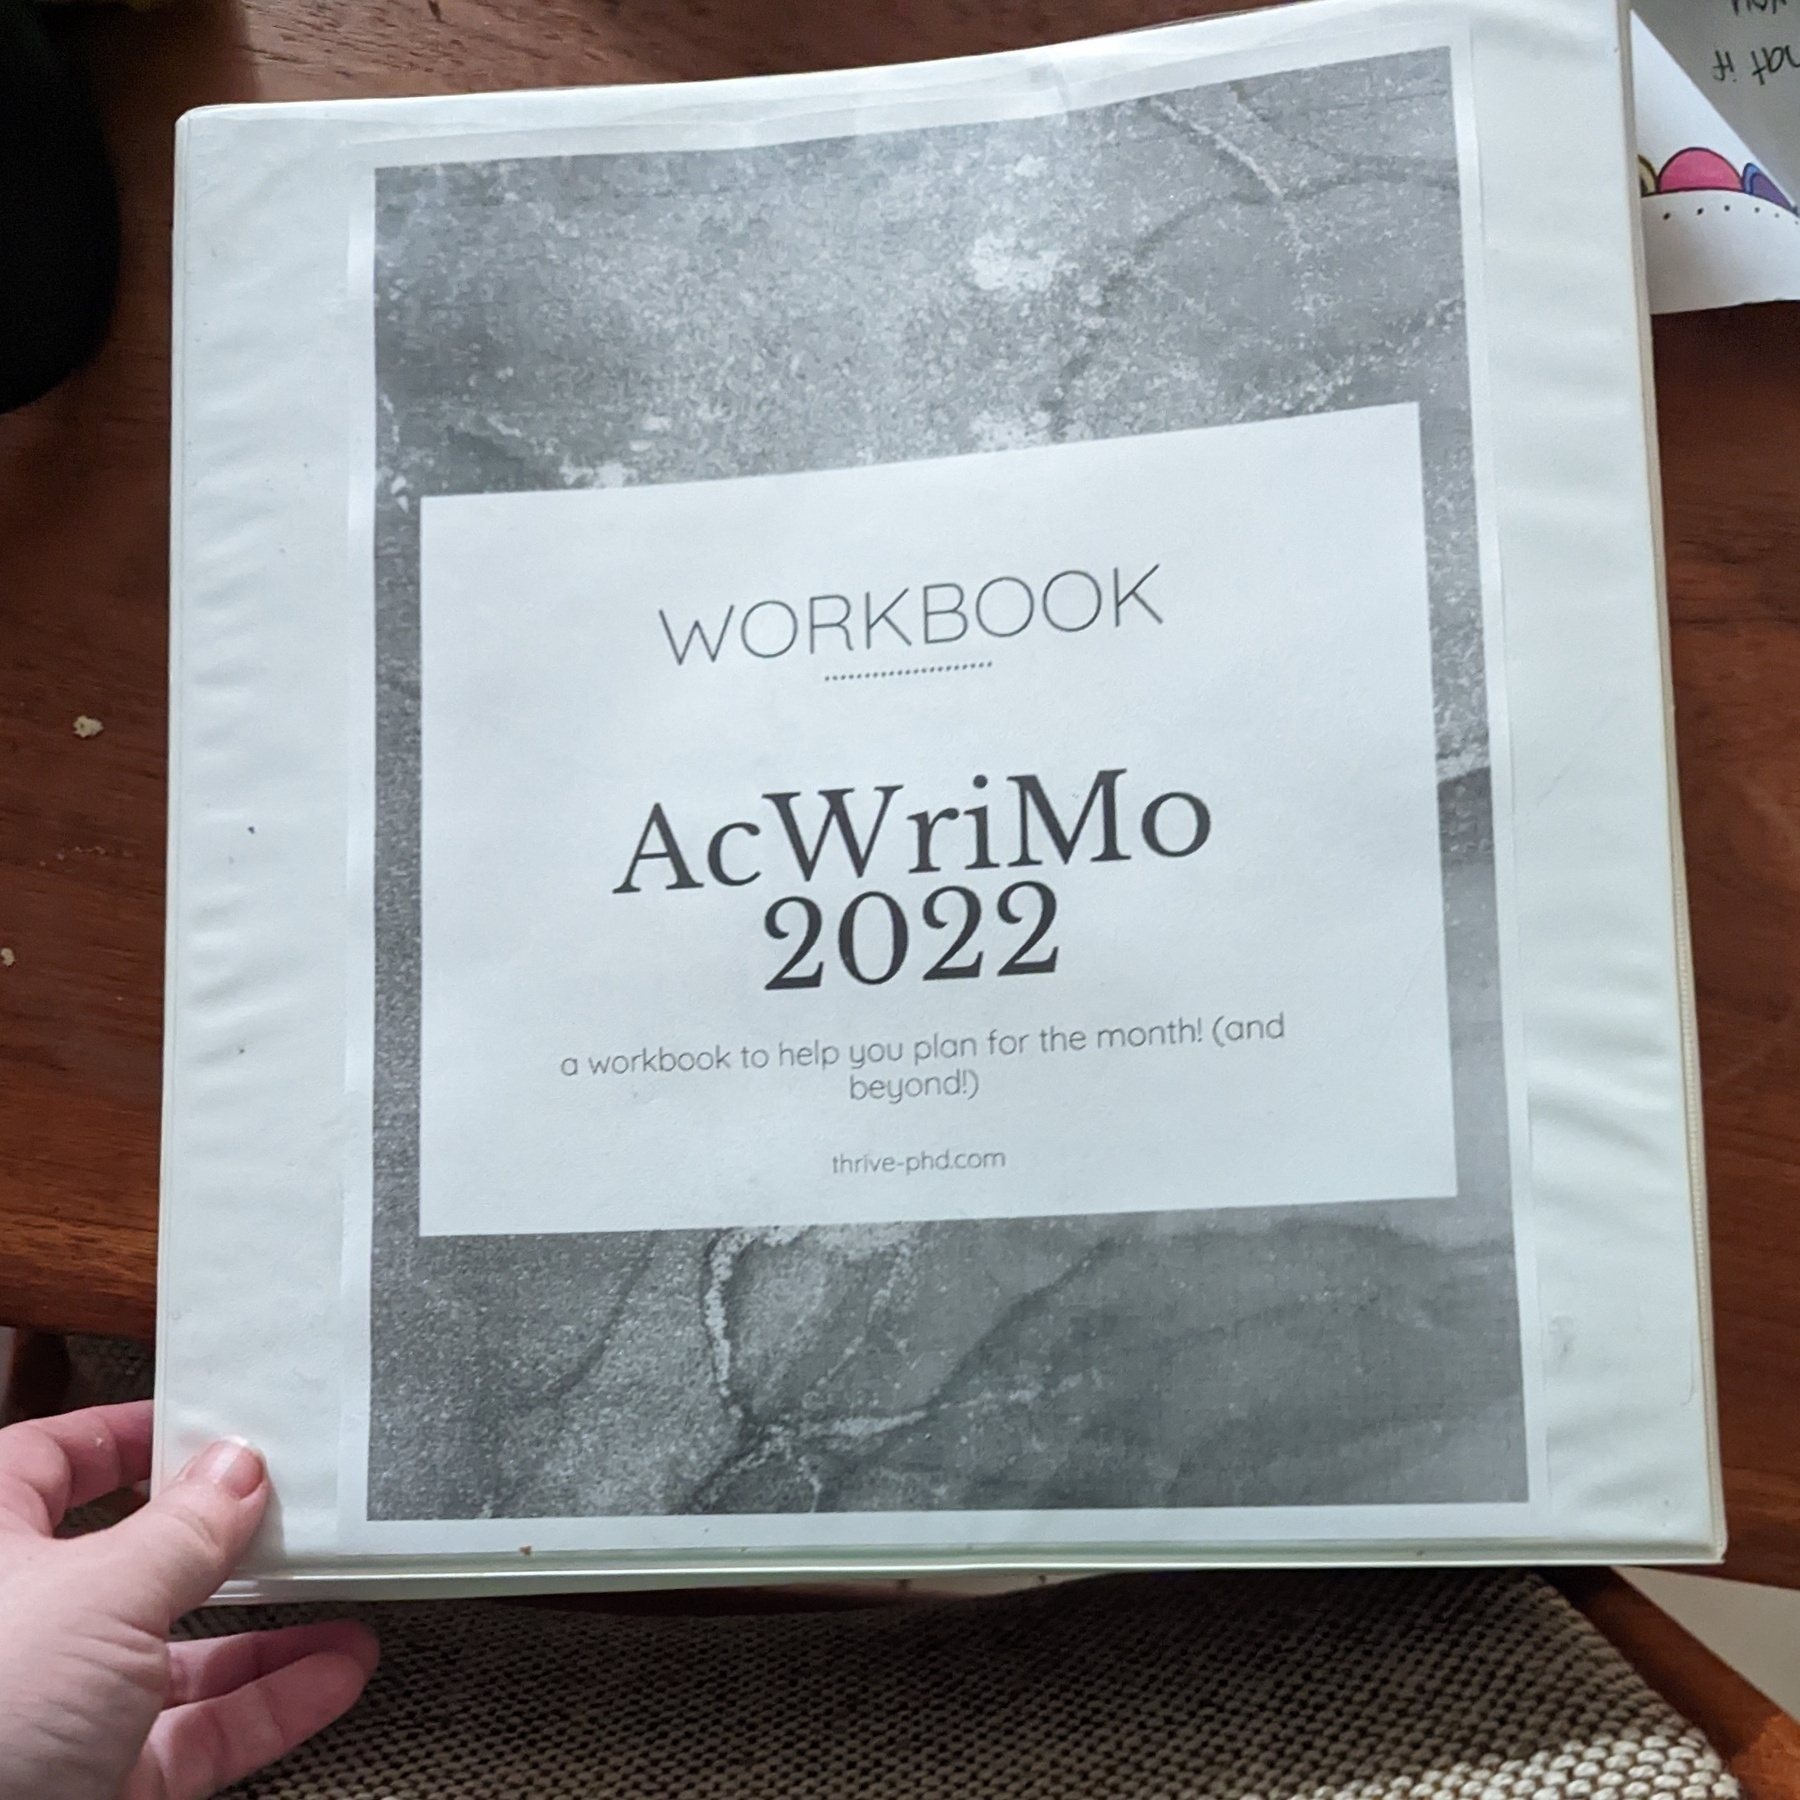 A hand holding a notebook with a cover that reads "Workbook AcWriMo 2022“